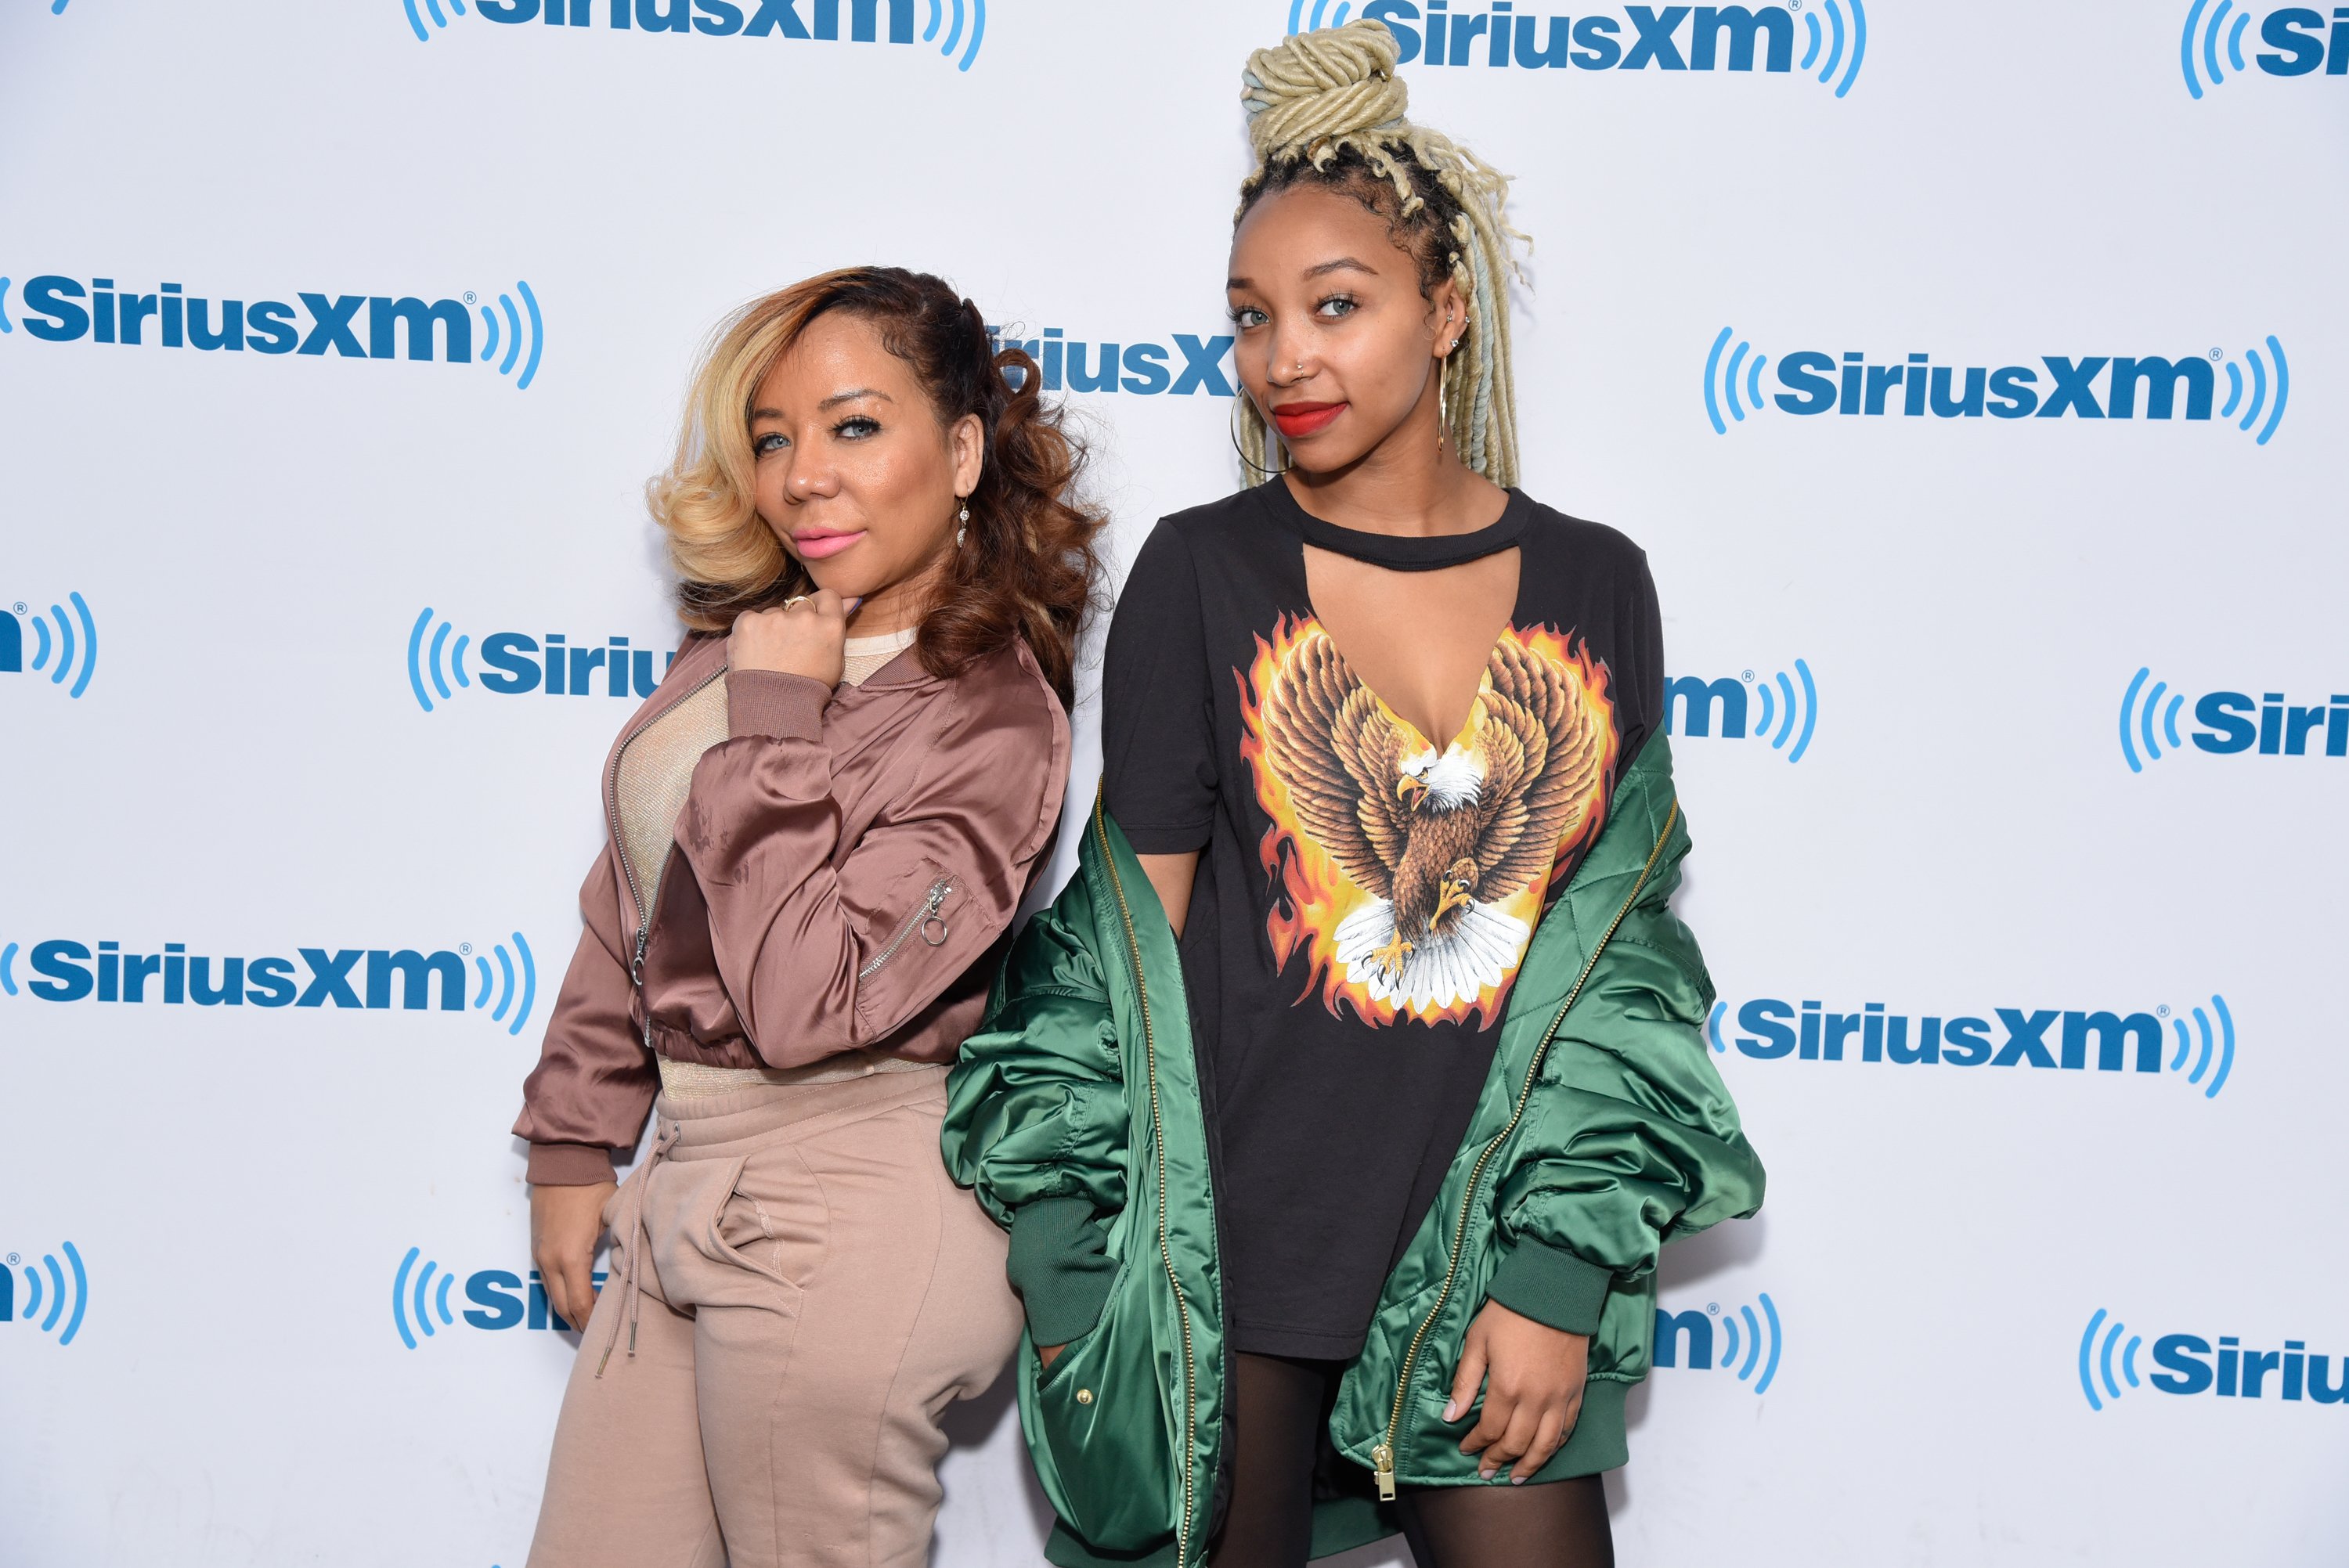 Tameka "Tiny" Harris and Zonnique Jailee Pullins at SiriusXM Studios in New York City | Photo: Getty Images